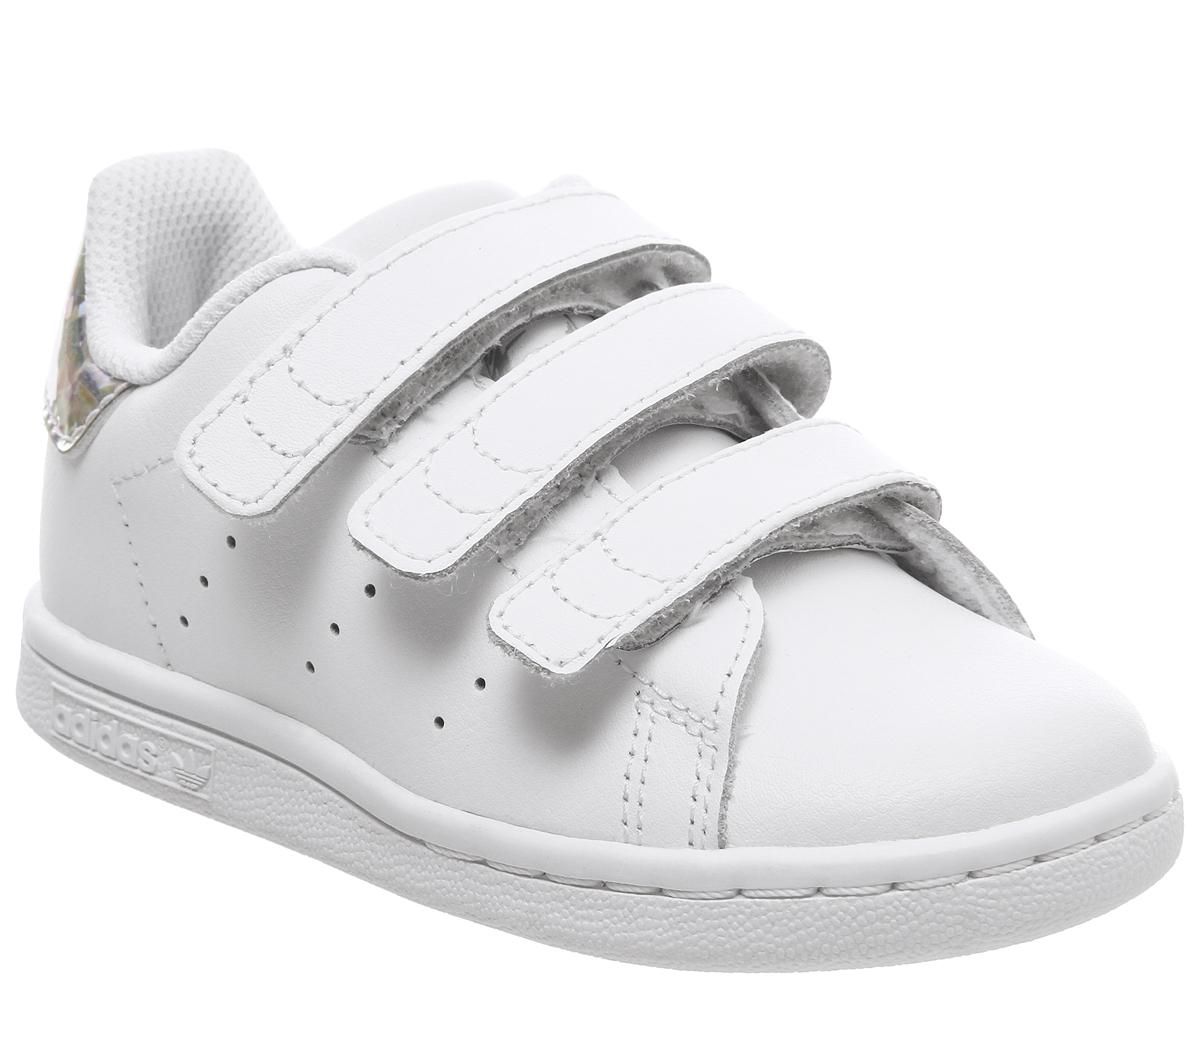 stan smith white and silver